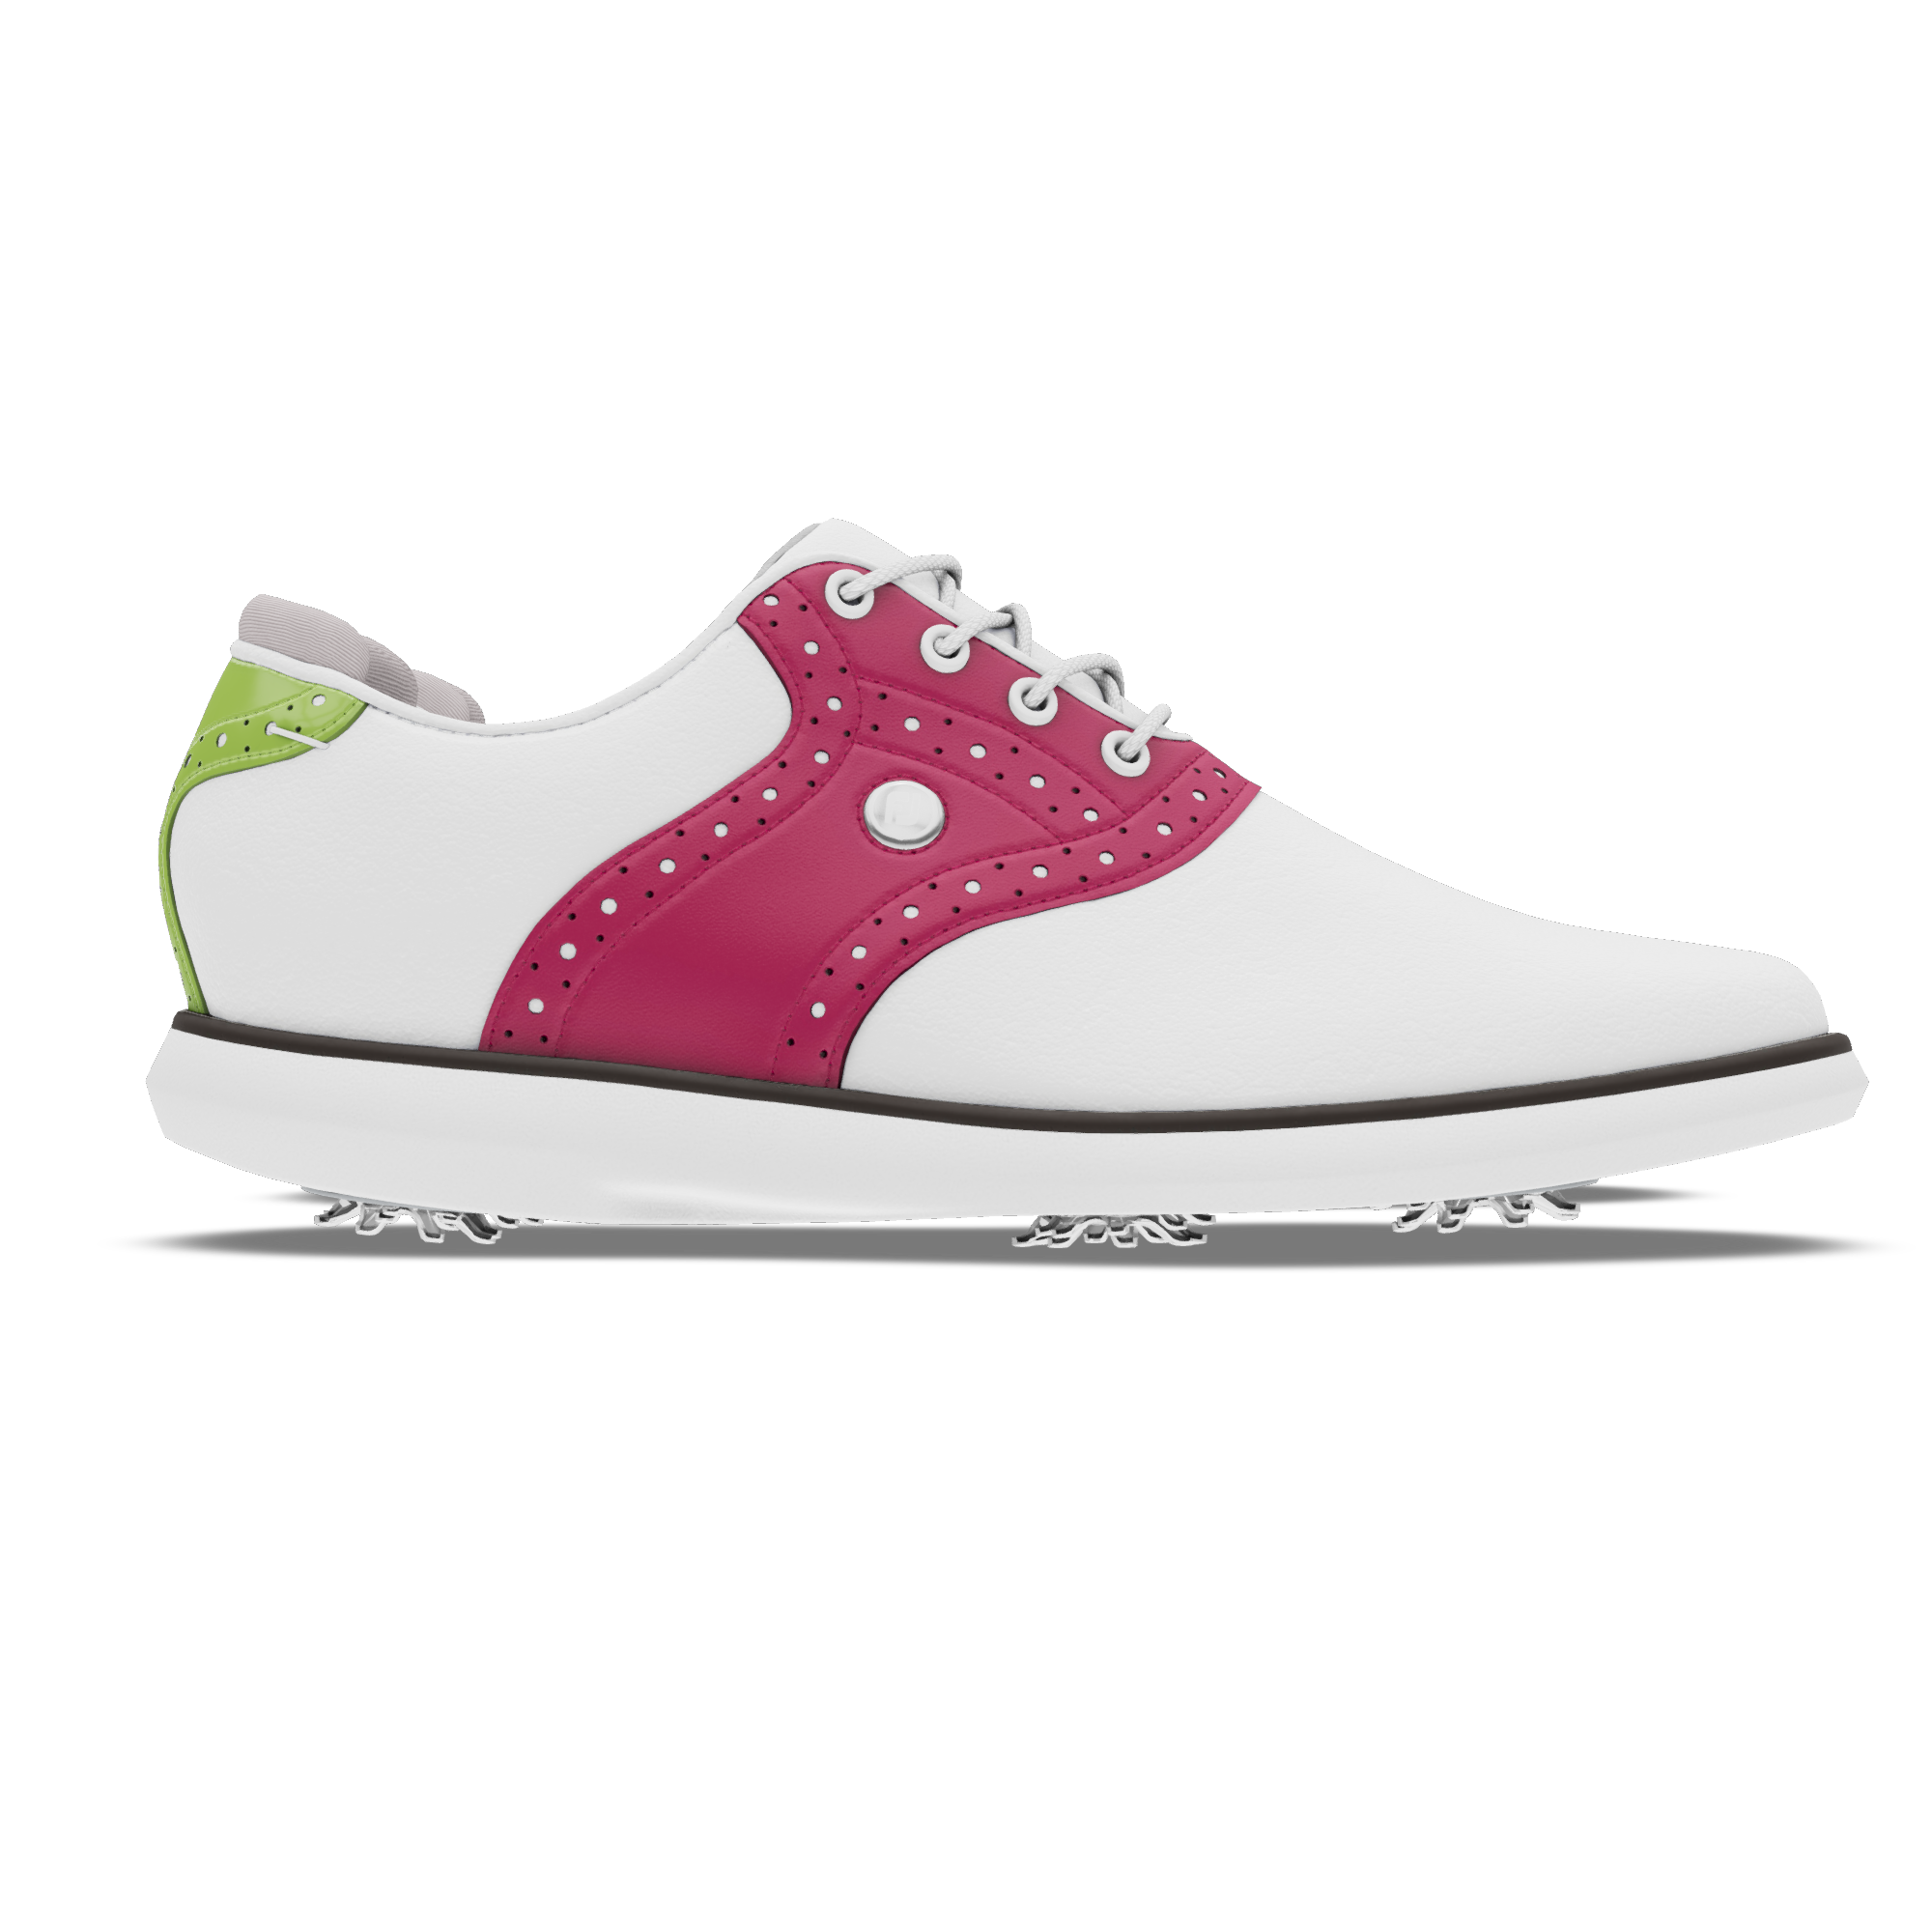 MyJoys Traditions Women